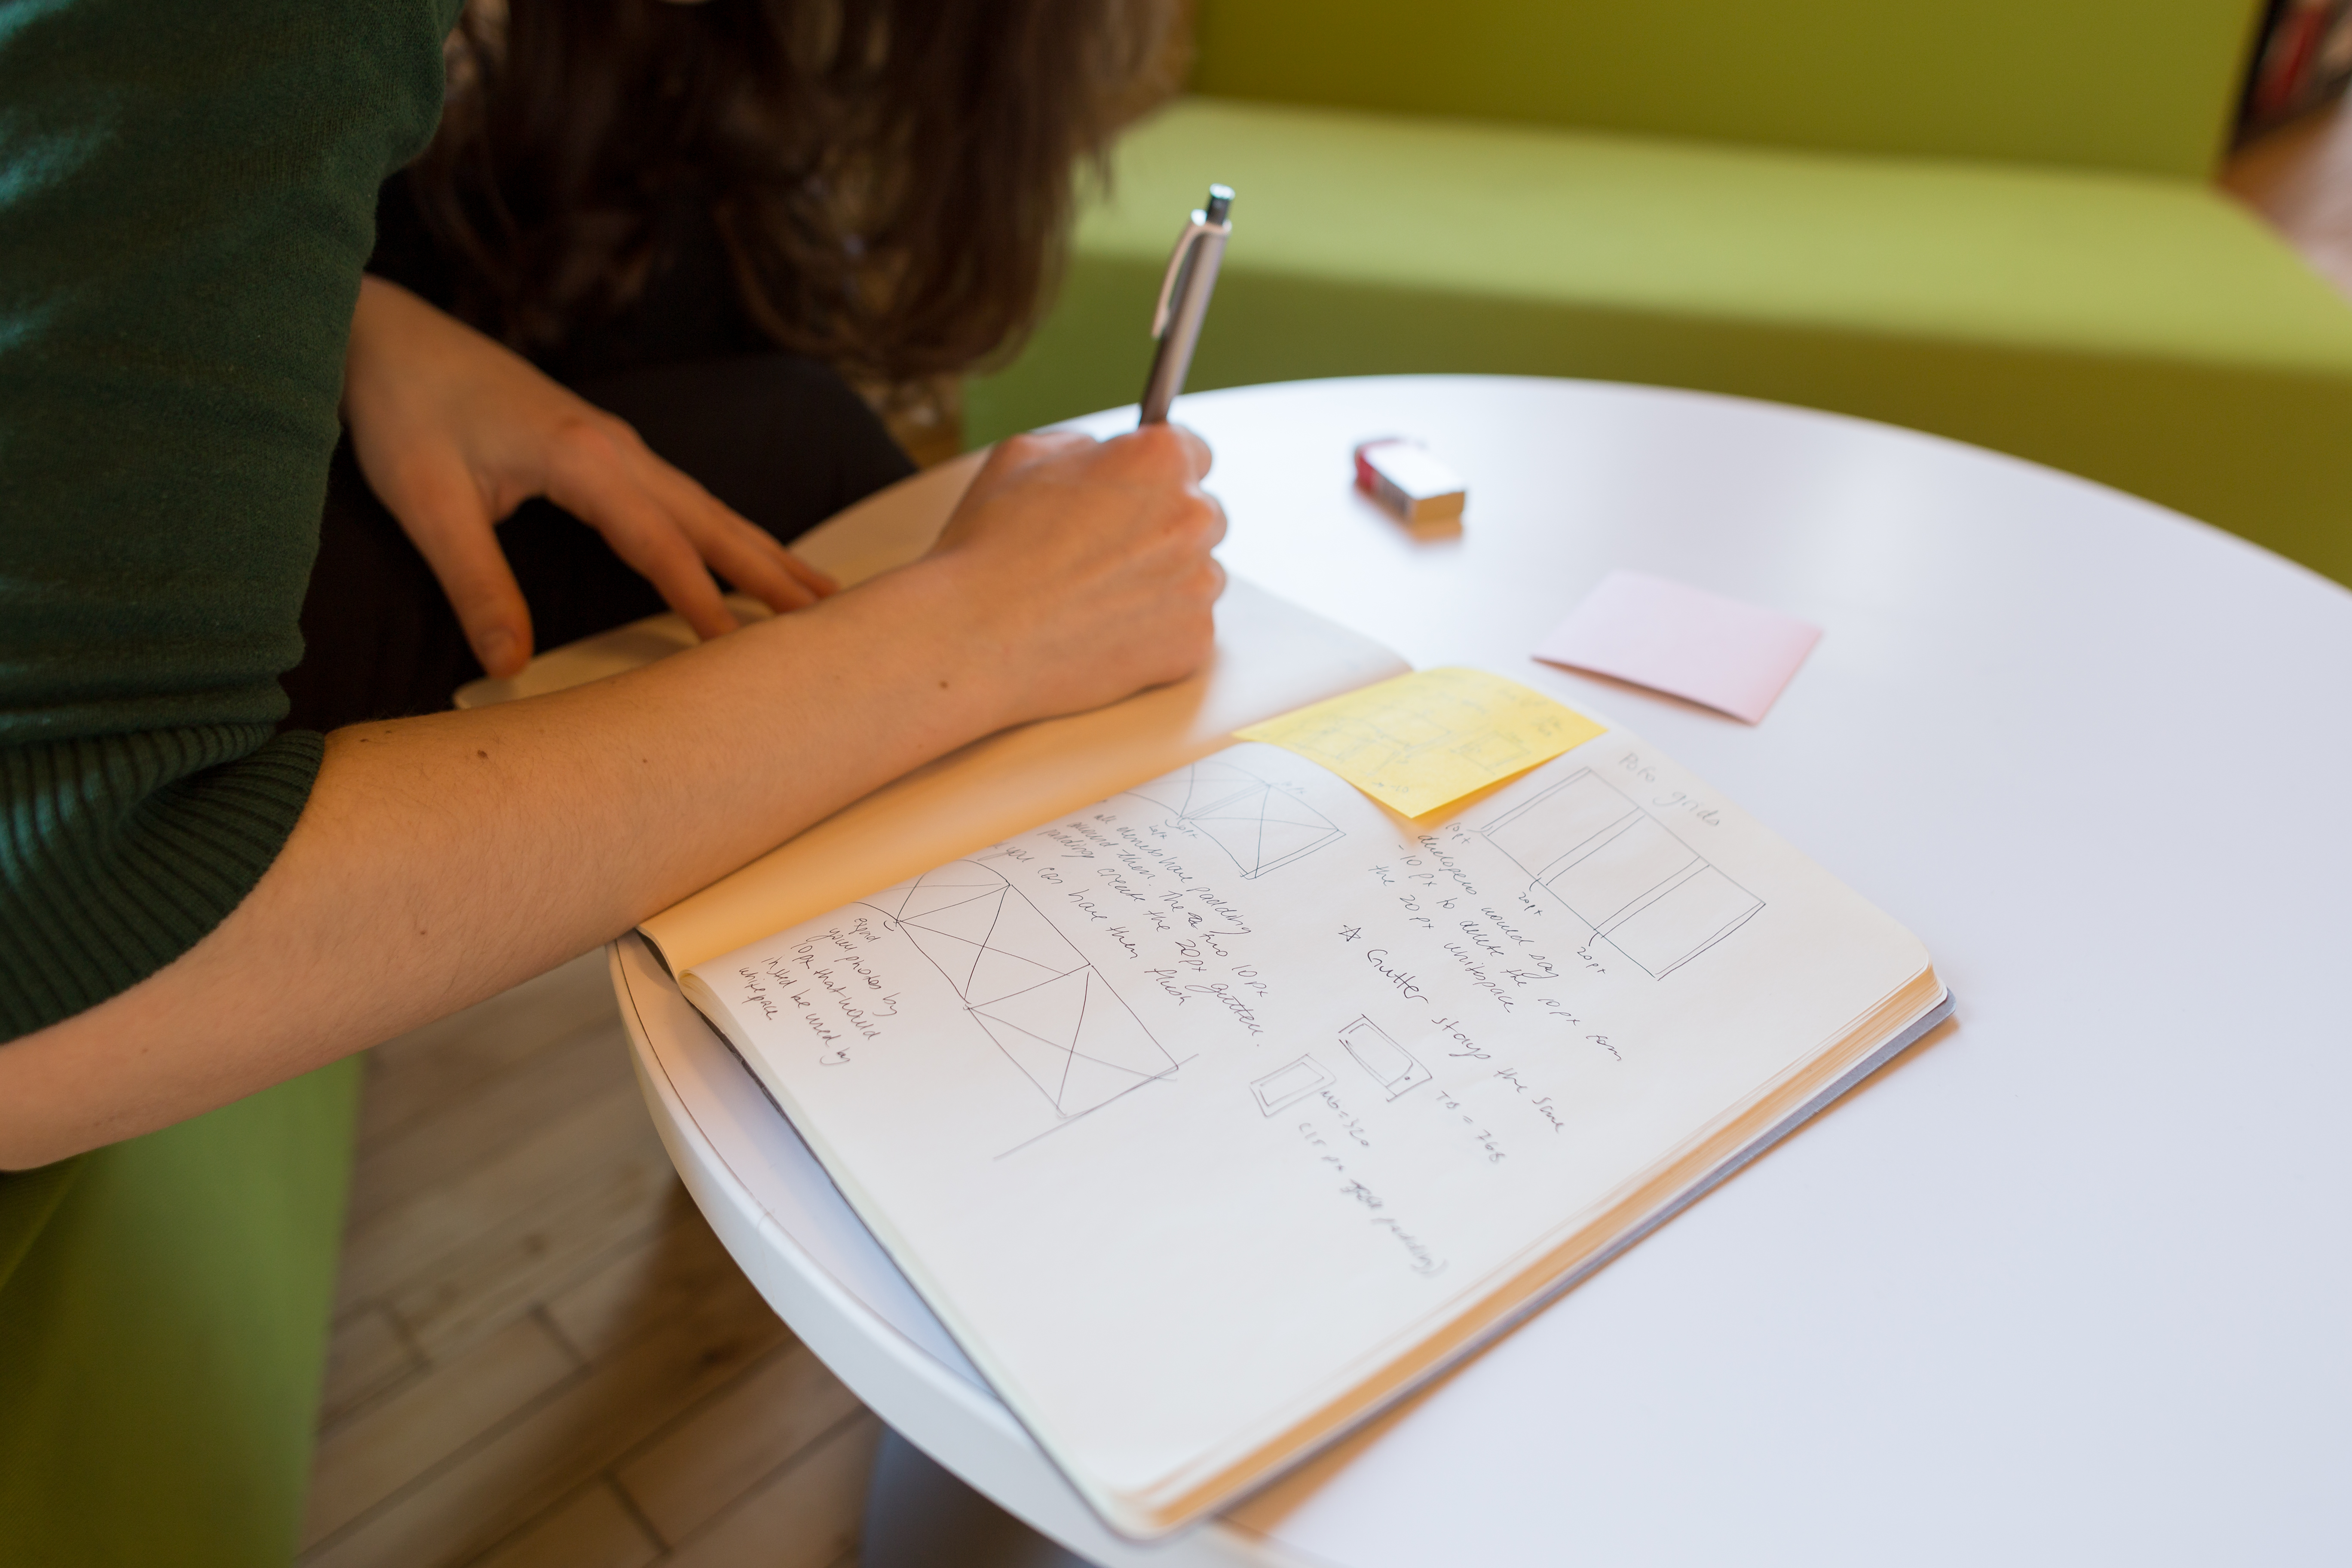 A UX design team of one is working alone, sketching in a notebook